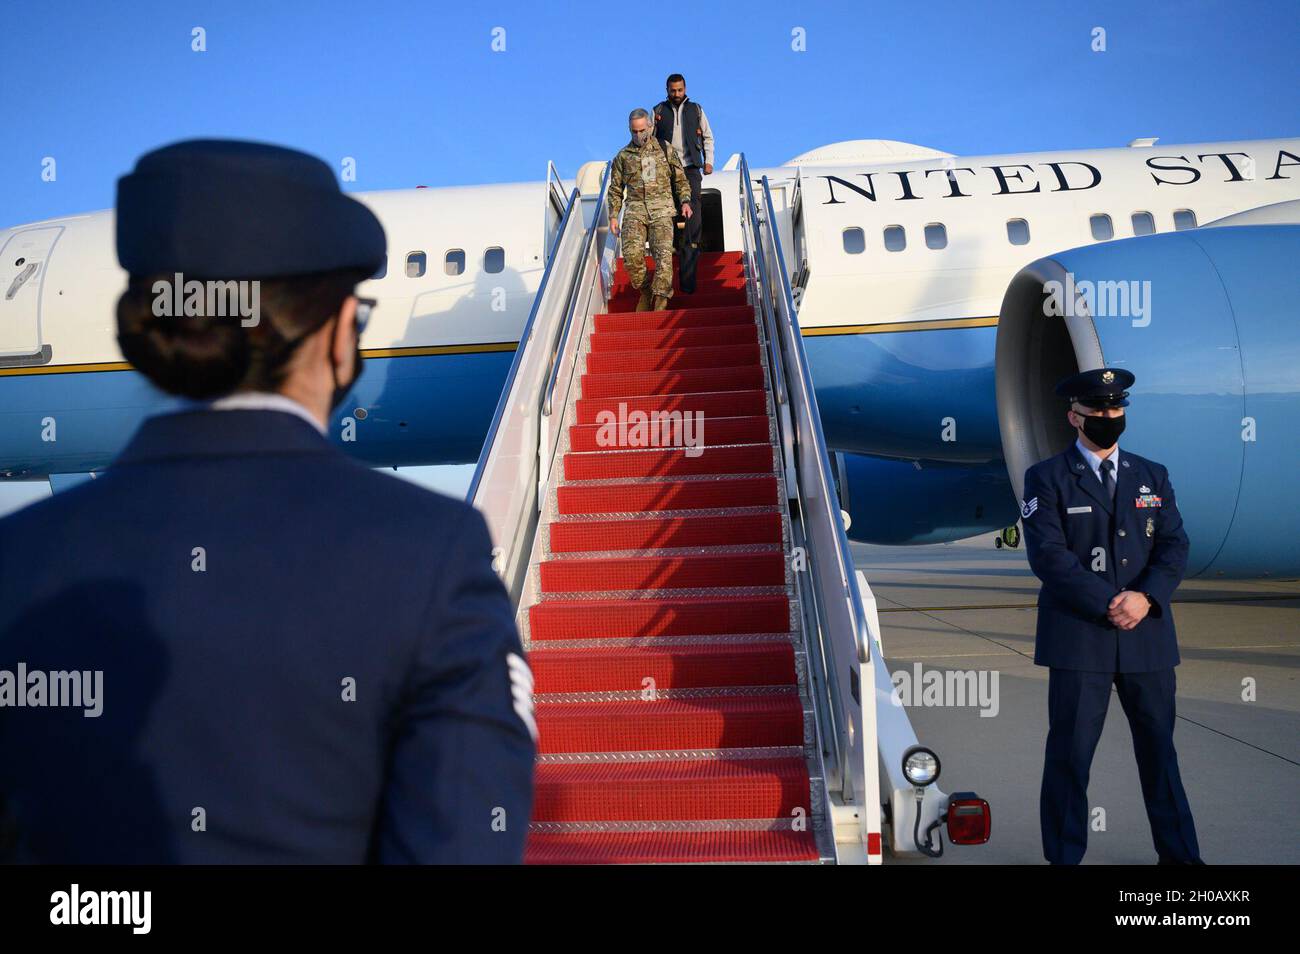 Senior Enlisted Advisor to the Chairman of the Joint Chiefs of Staff Ramón Colón-López and the chief of staff to Acting Defense Secretary Chris Miller, Kash Patel, arrive at Joint Base Andrews, Md., with Acting Defense Secretary Chris Miller, Jan. 14, 2021. Stock Photo